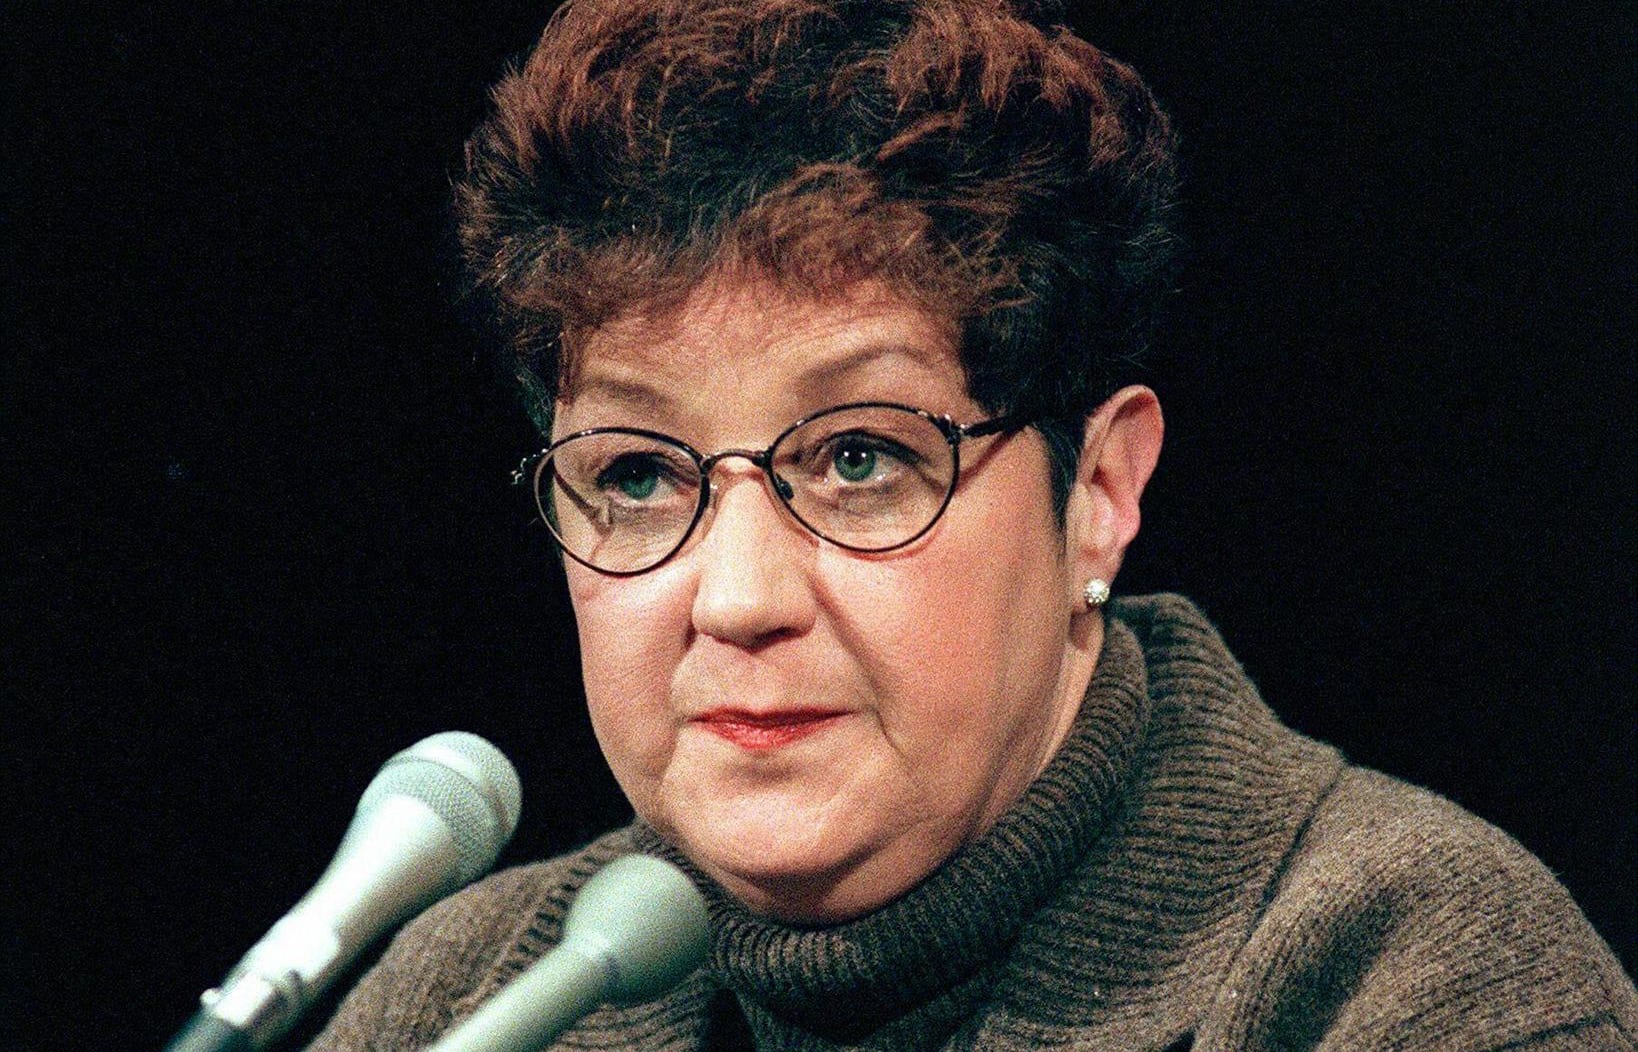 Norma McCorvey, the woman at the center of the US Supreme Court ruling on abortion, testifies before a US Senate Judiciary Committee subcommittee during hearings on the 25th anniversary of Roe v. Wade.